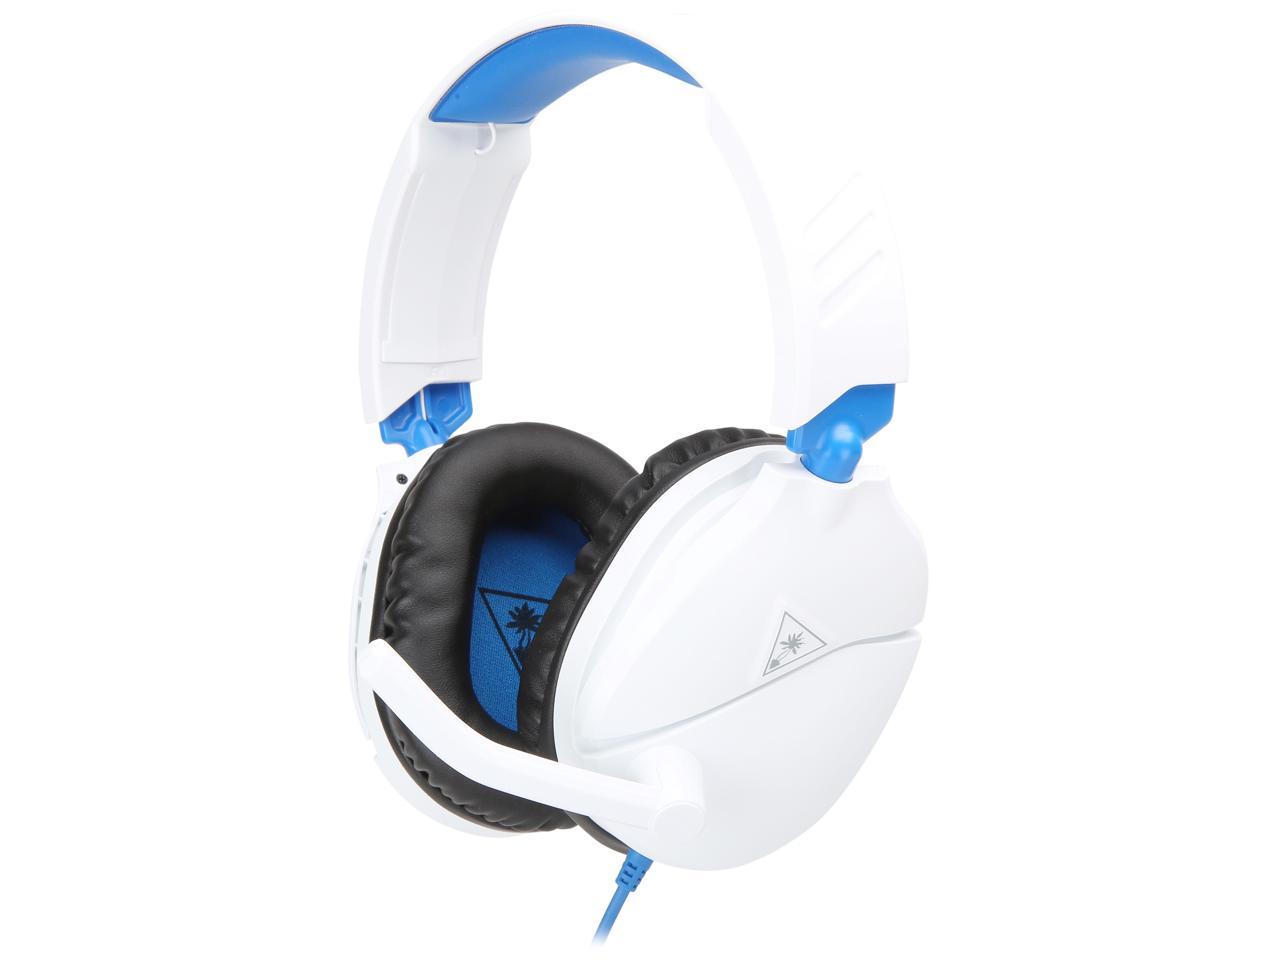 turtle beach recon 70p gaming headset for ps4